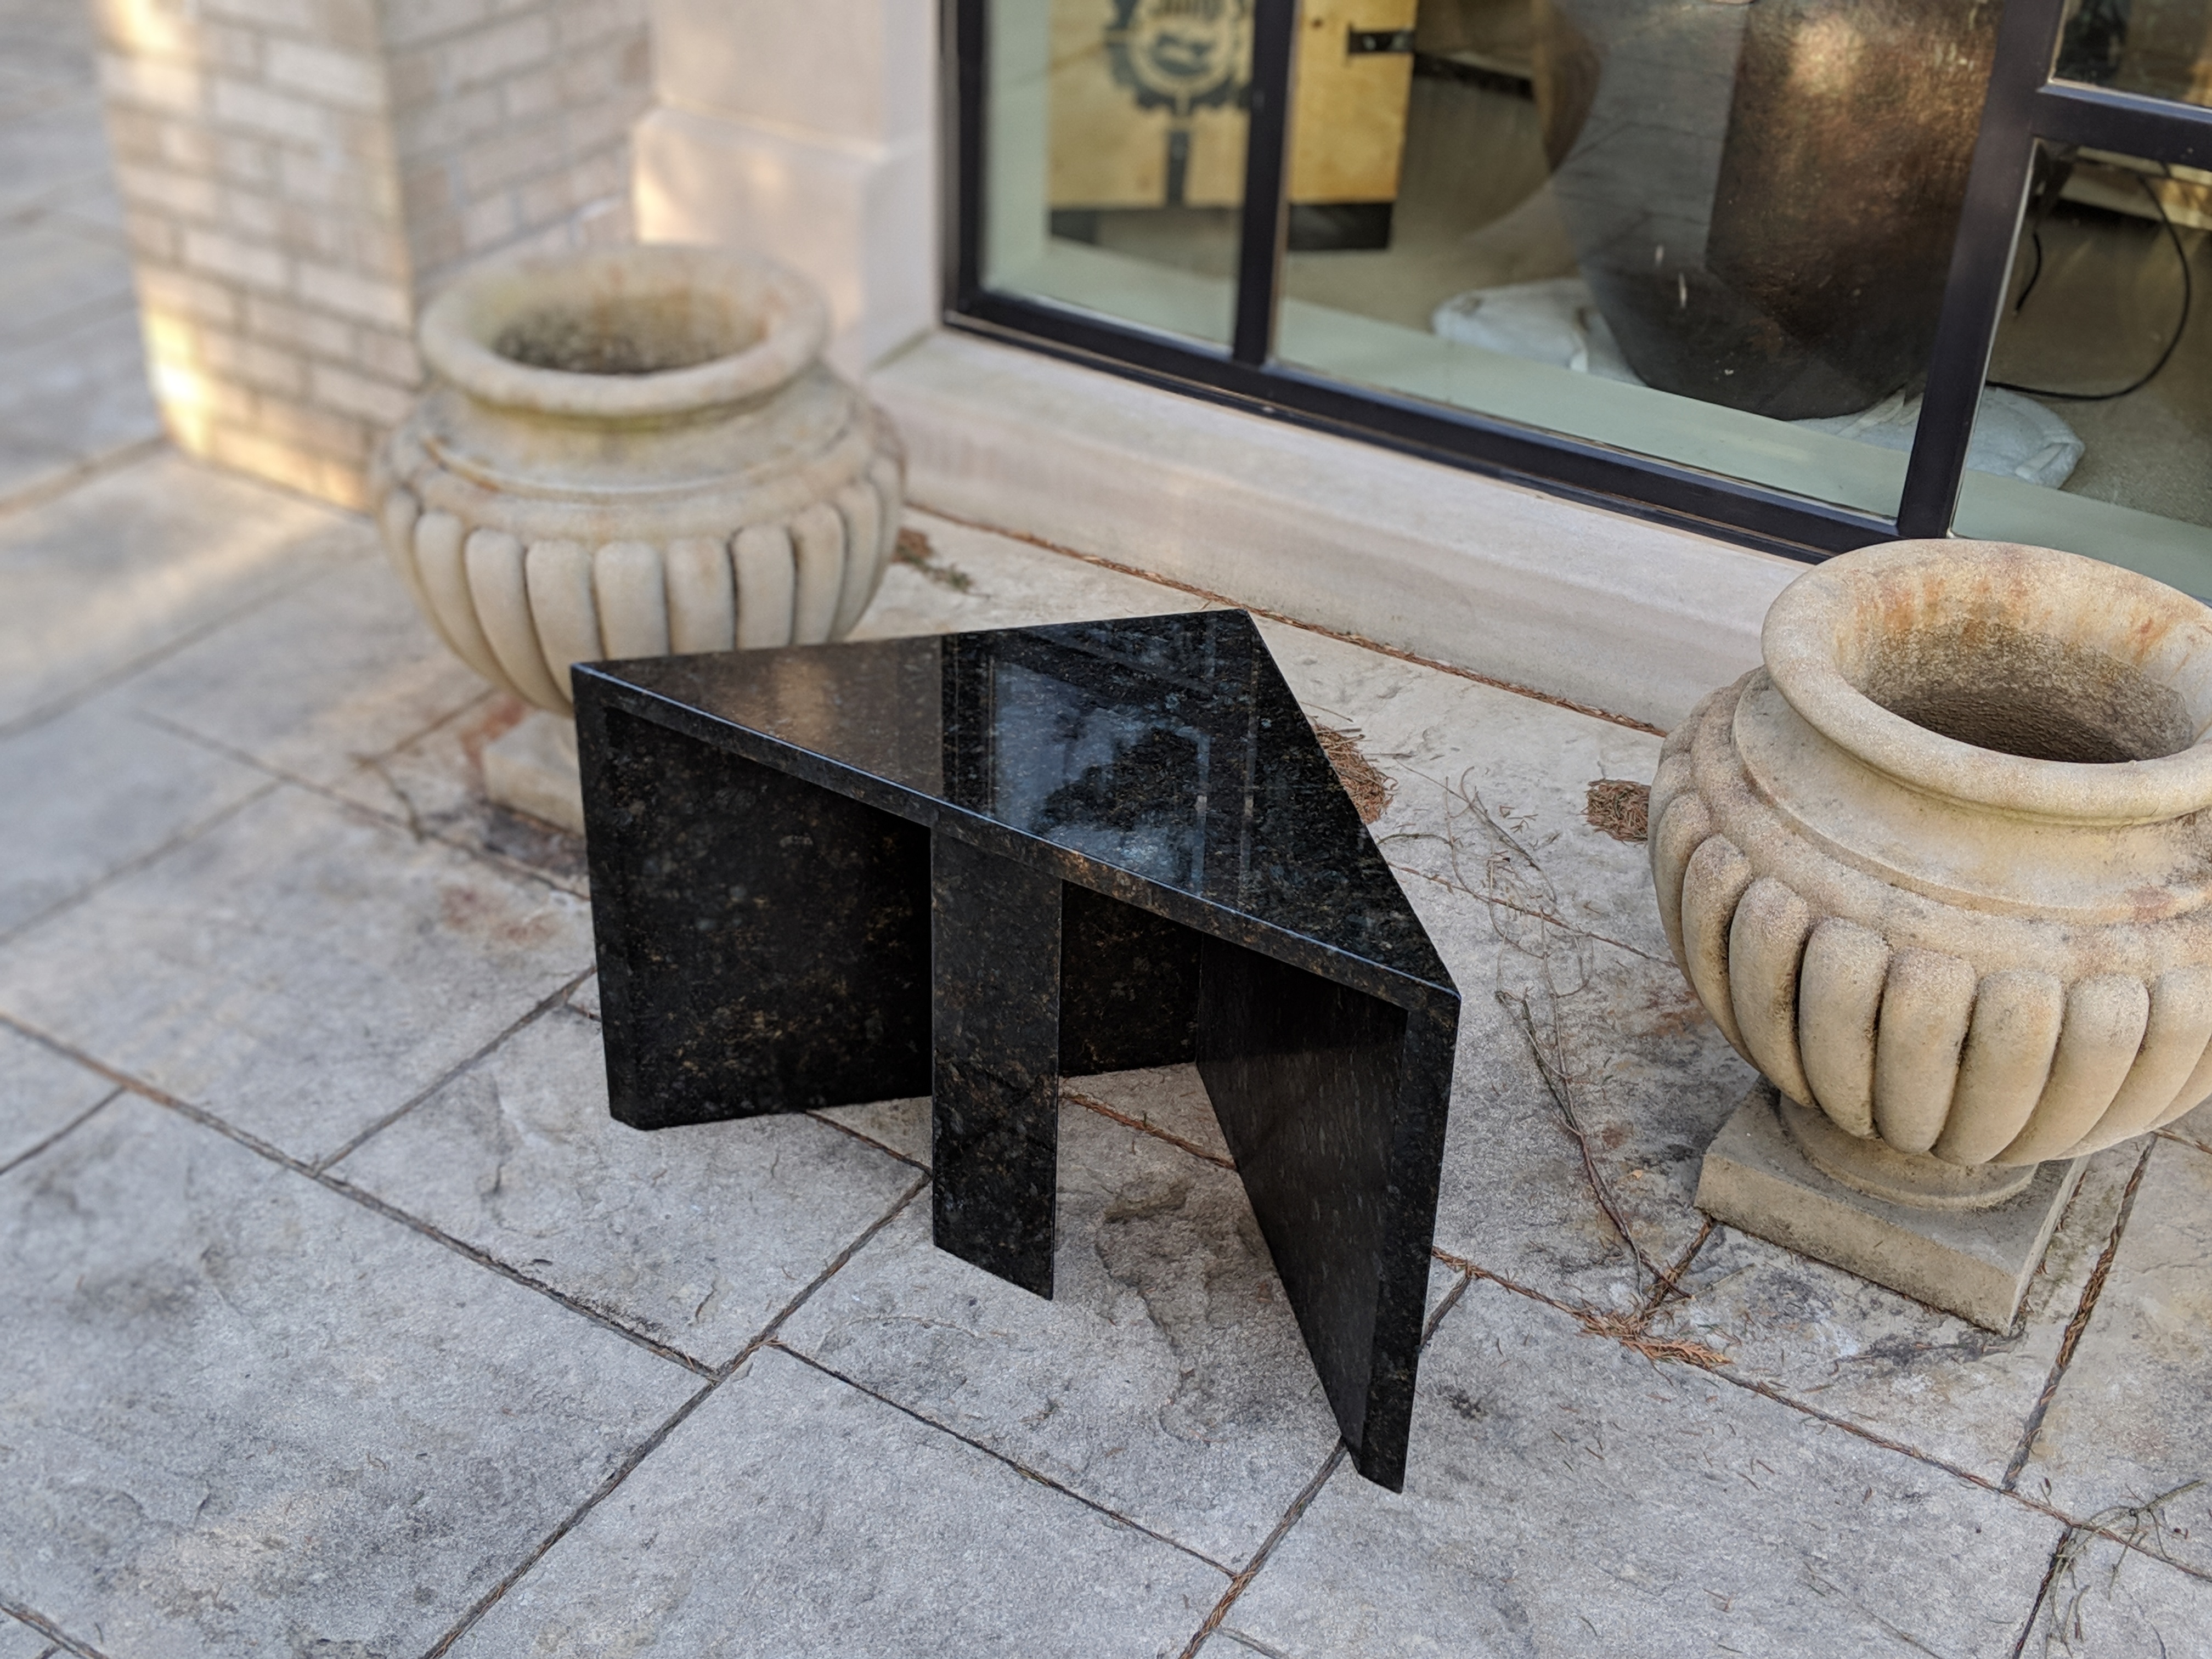 Outdoor seat made from granite remnants